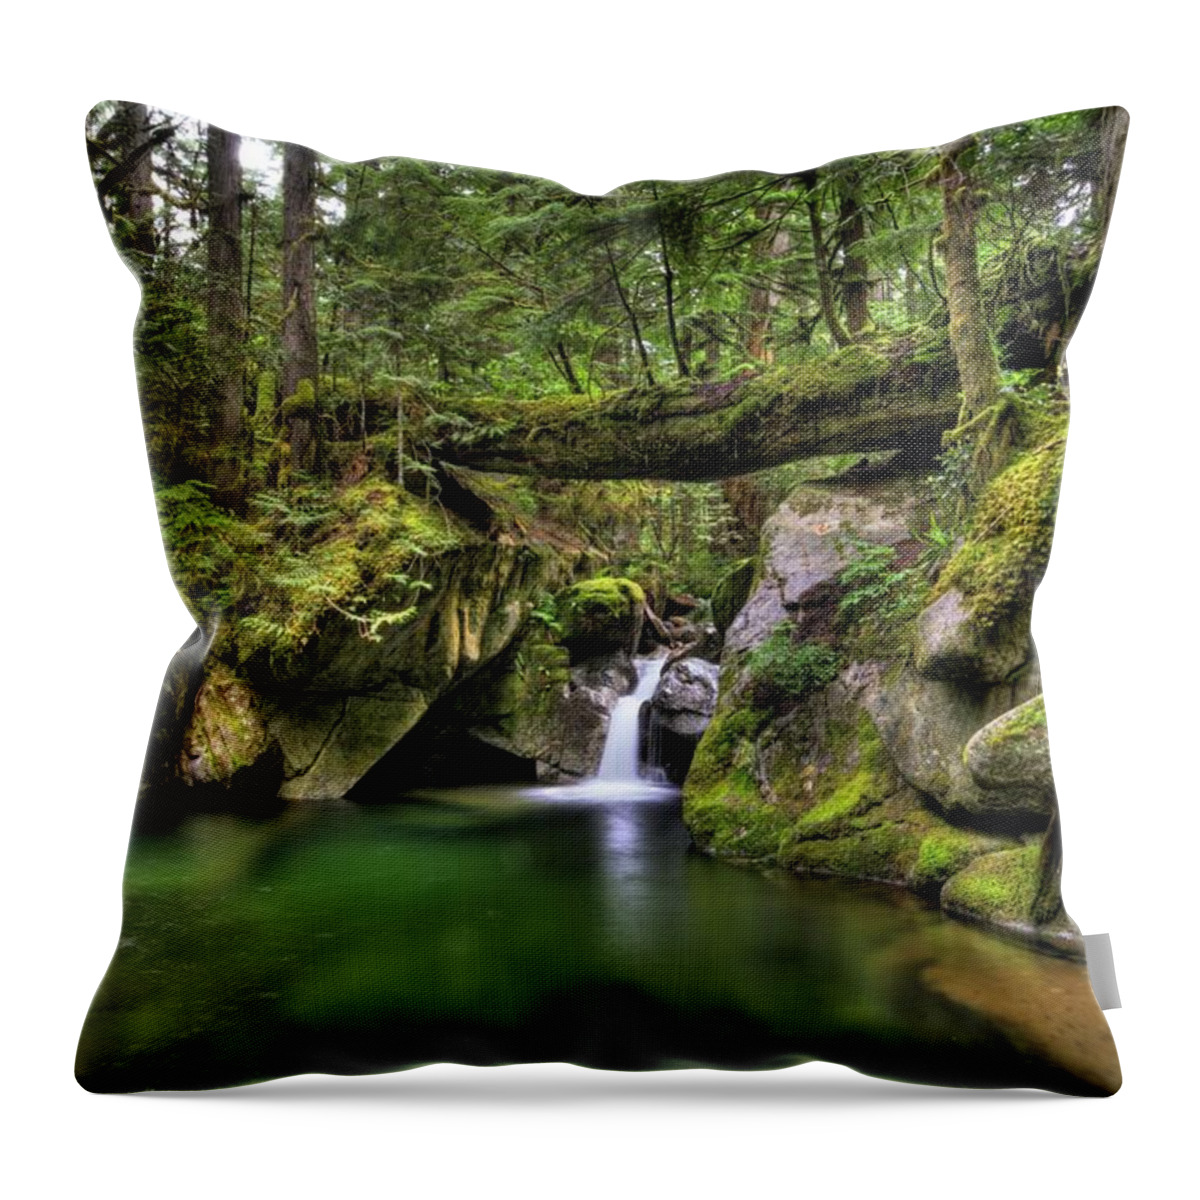 Hdr Throw Pillow featuring the photograph Deception Creek by Brad Granger